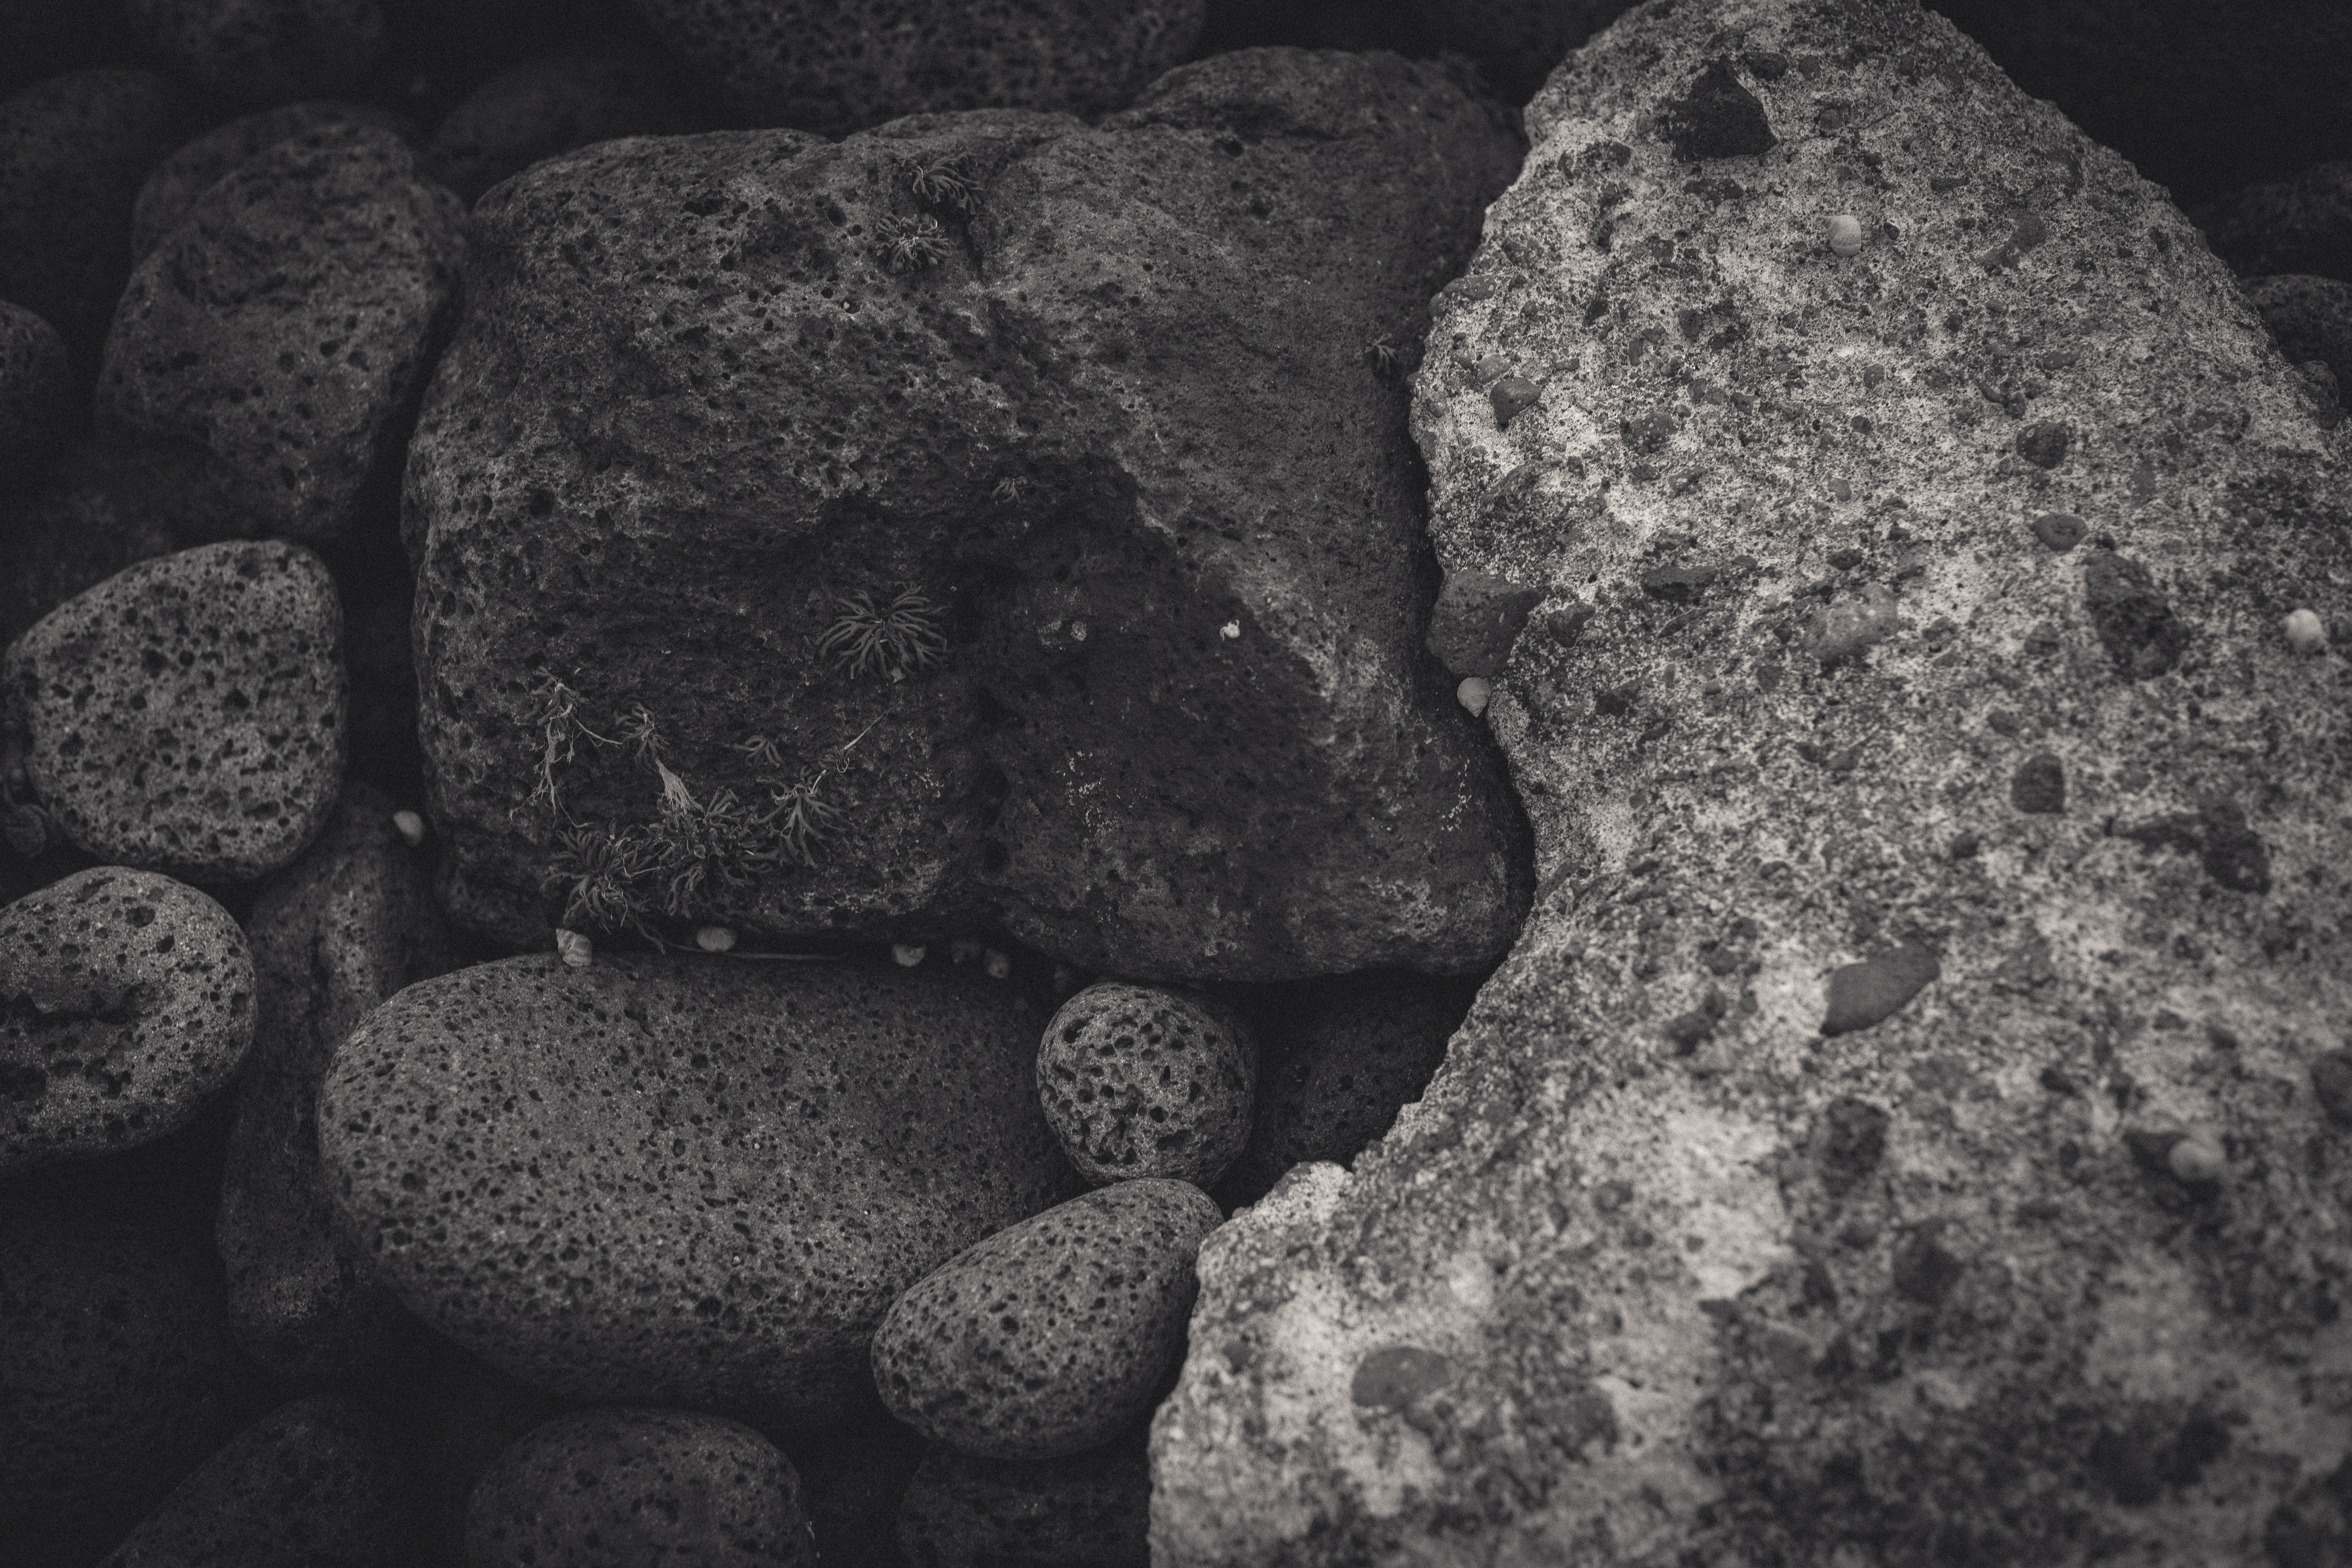 Black and White Boulders, Black, Boulders, Gray, Grayscale, HQ Photo